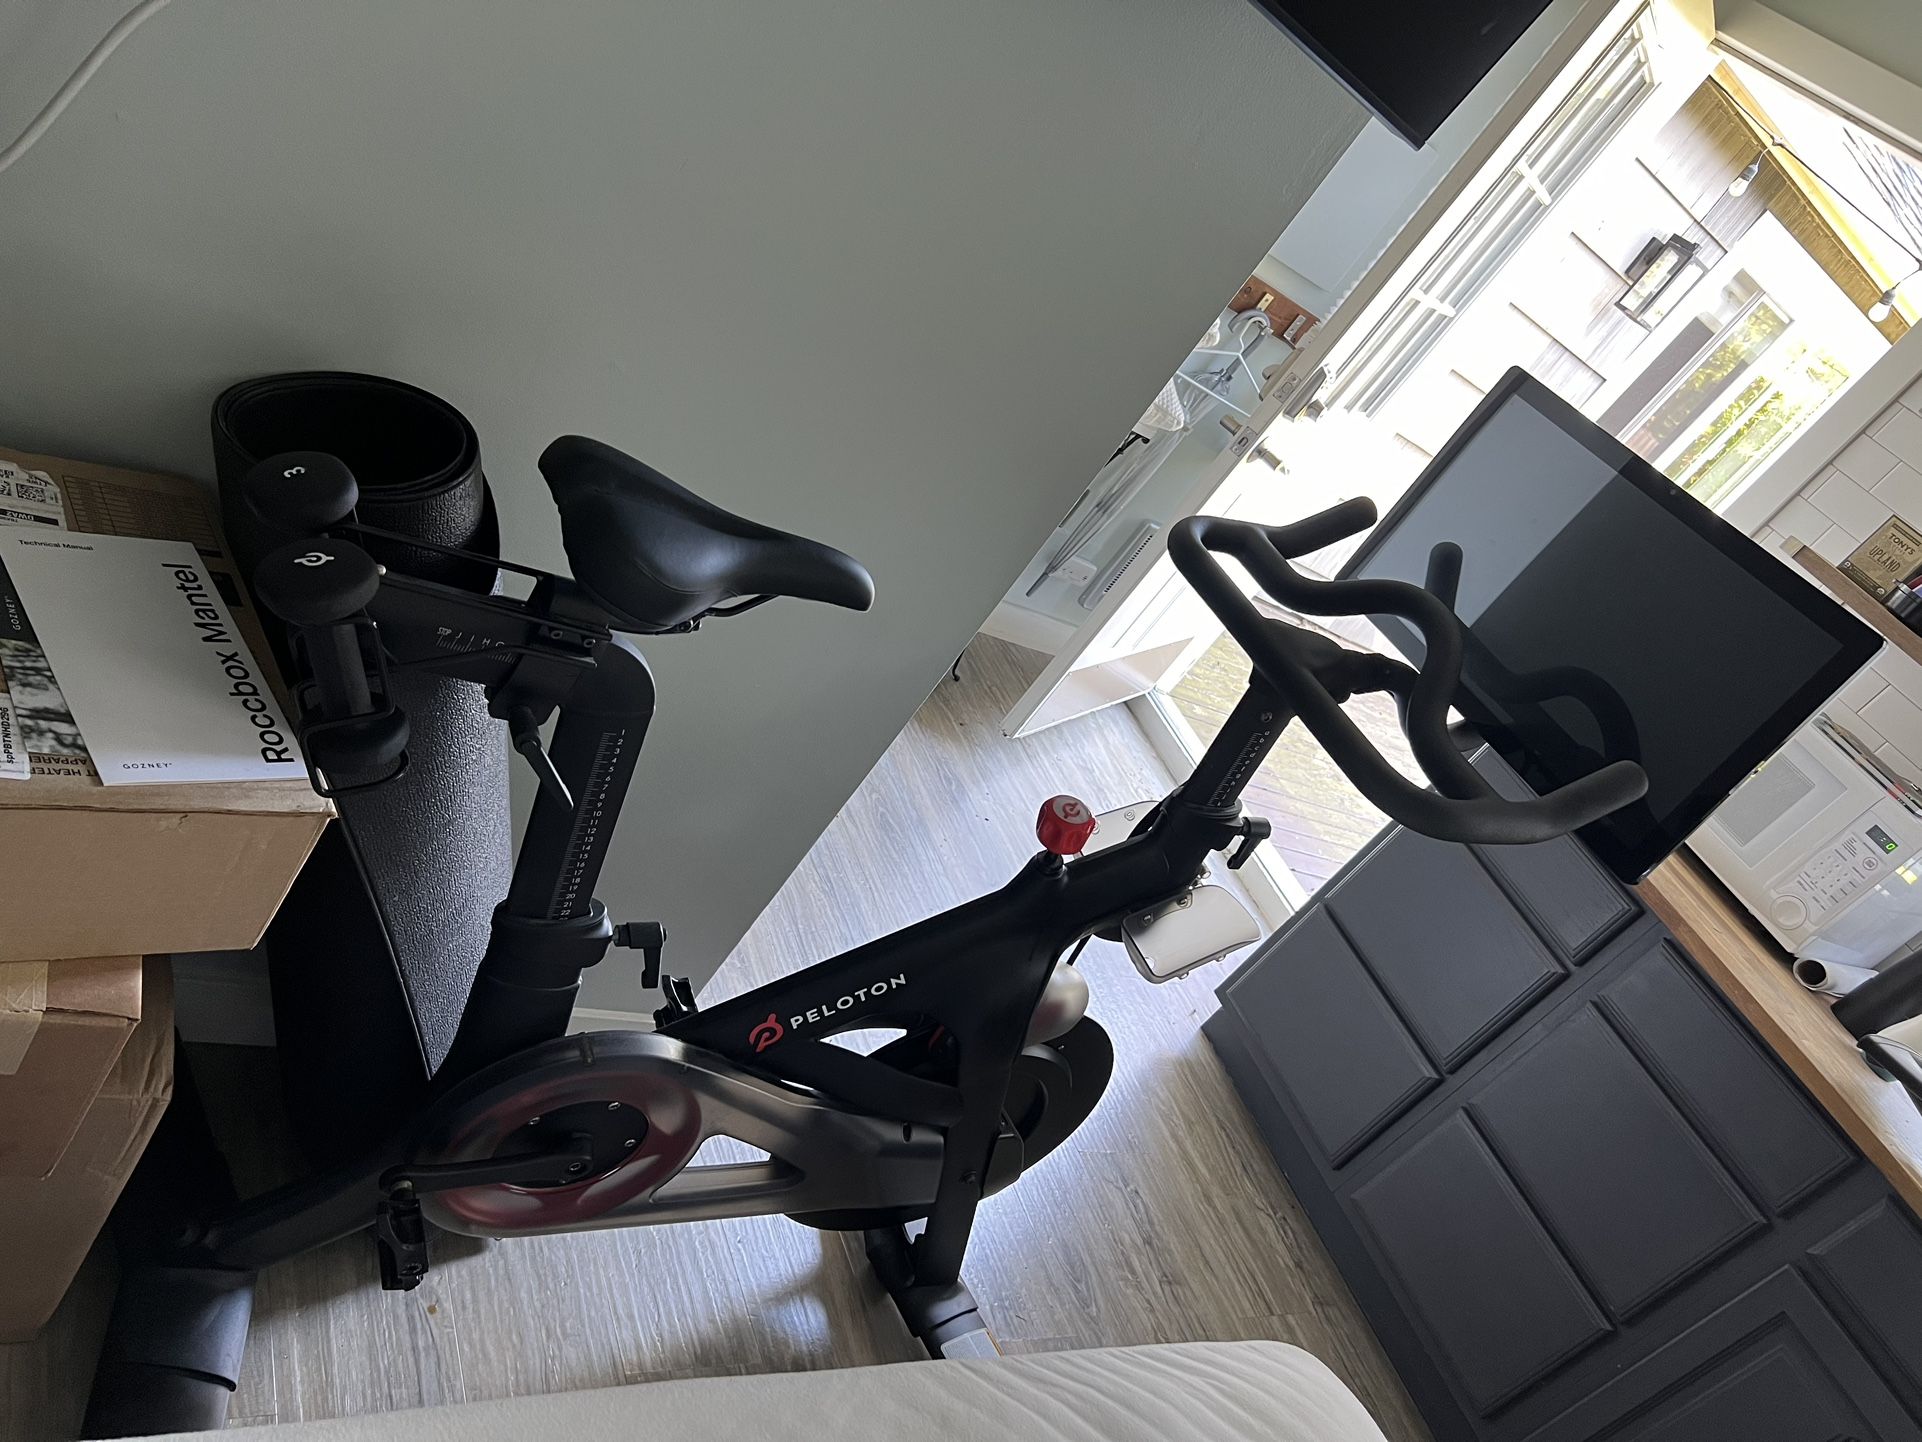 Peloton With Weights, Mat And Shoes For Sale